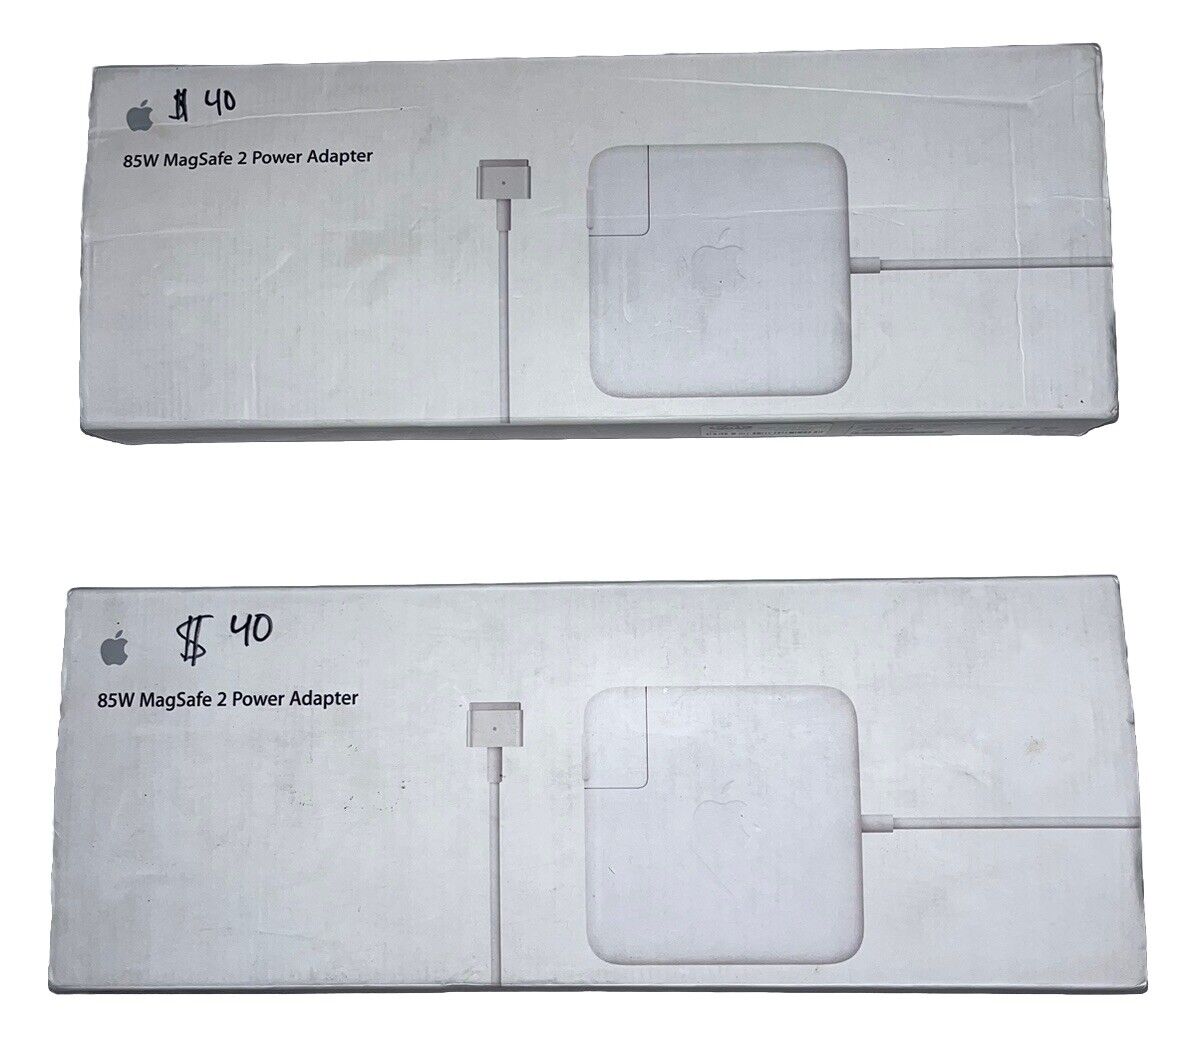 2 Packs New Apple 85W MagSafe 2 Power Adapter White A1424 MD506LL/A